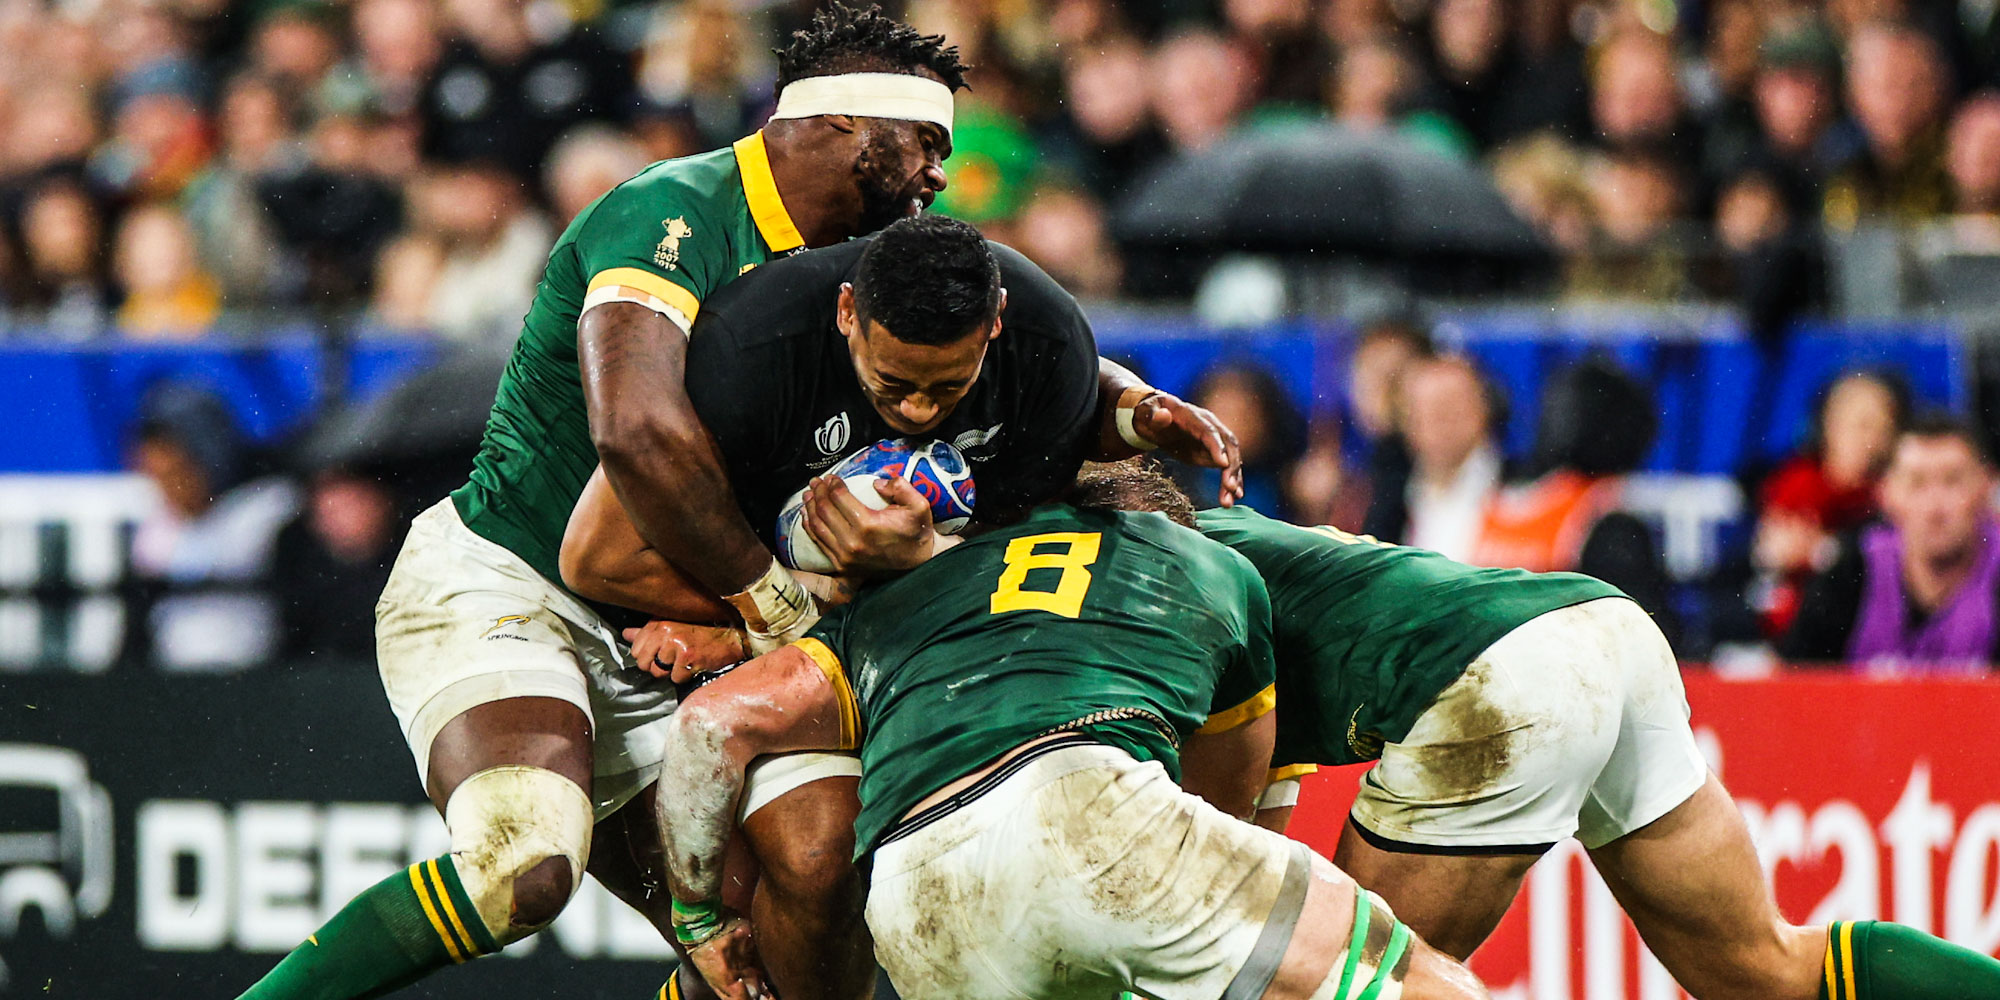 The Springboks put in a massive defensive display against the All Blacks.